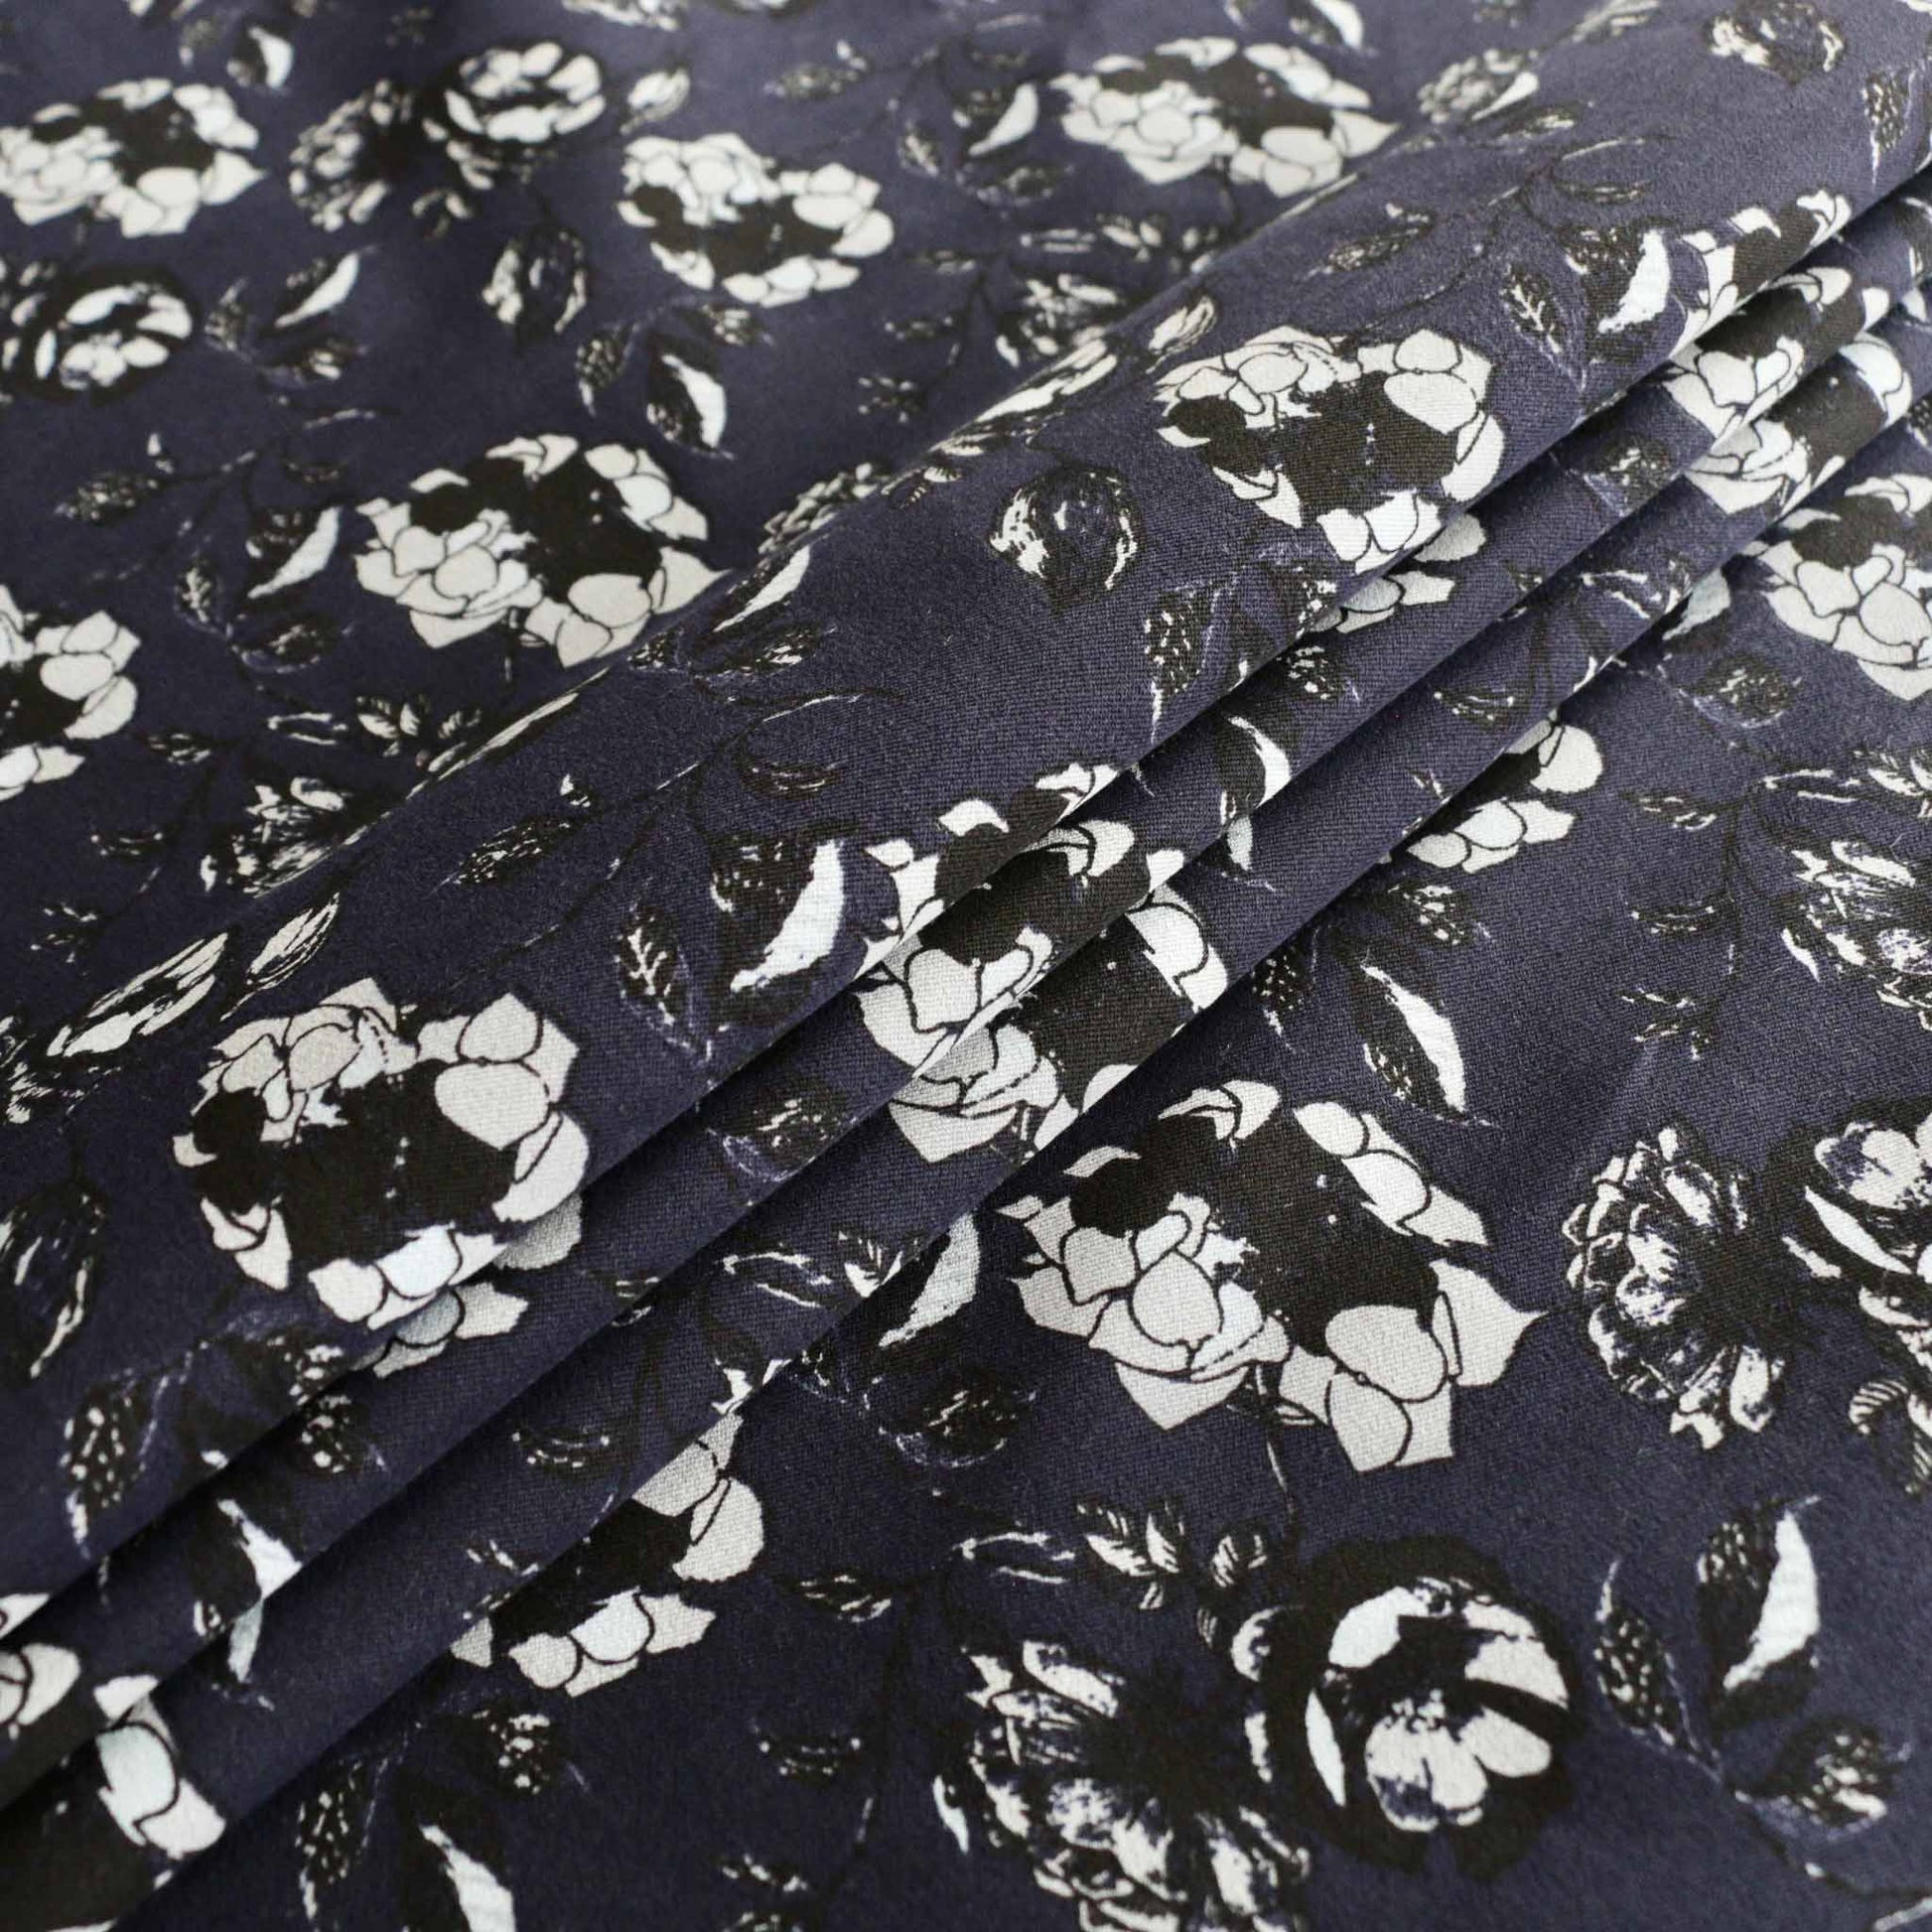 navy blue folded cotton sateen dress fabric with white and black flowers printed